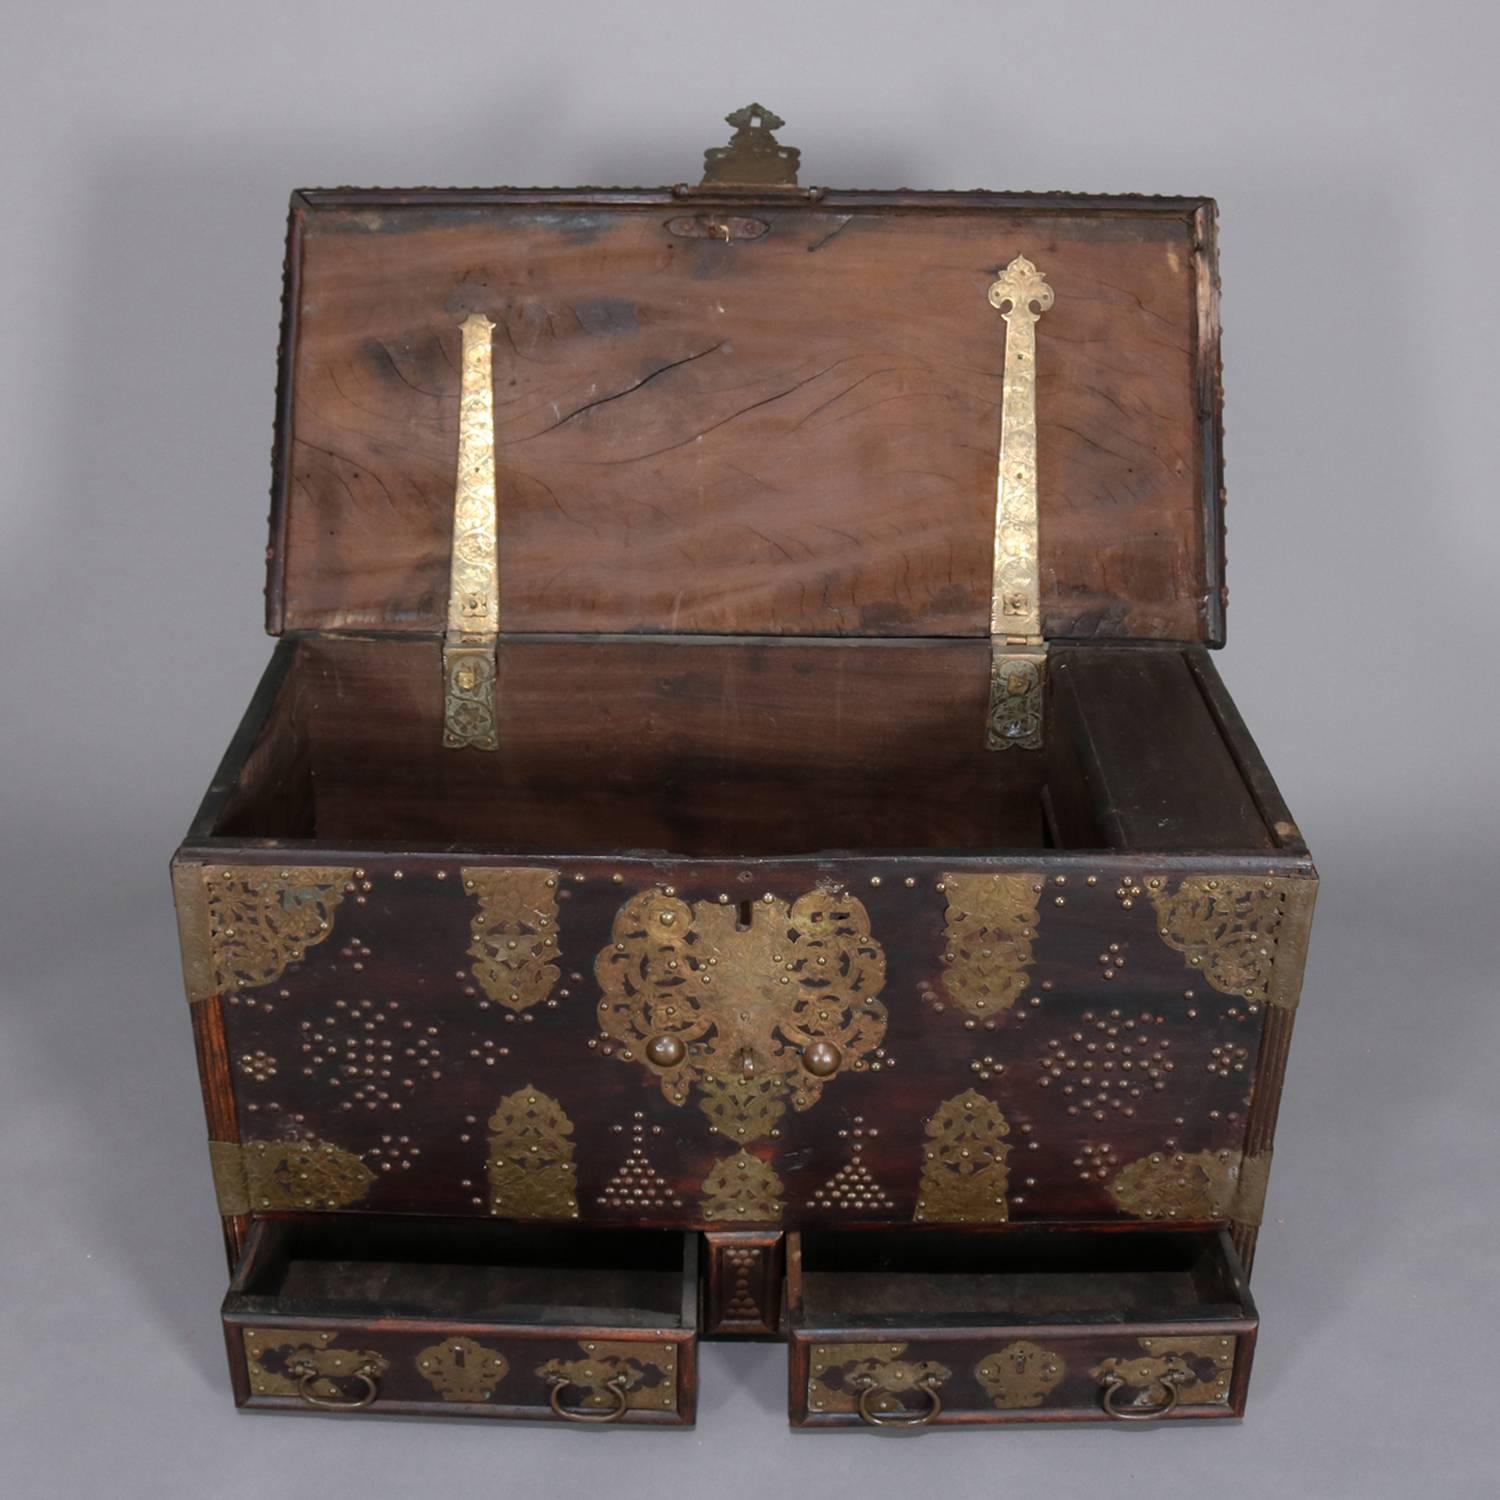 Antique Rosewood and Brass Turkish Marital Bride's Trunk, Early 19th Century 2